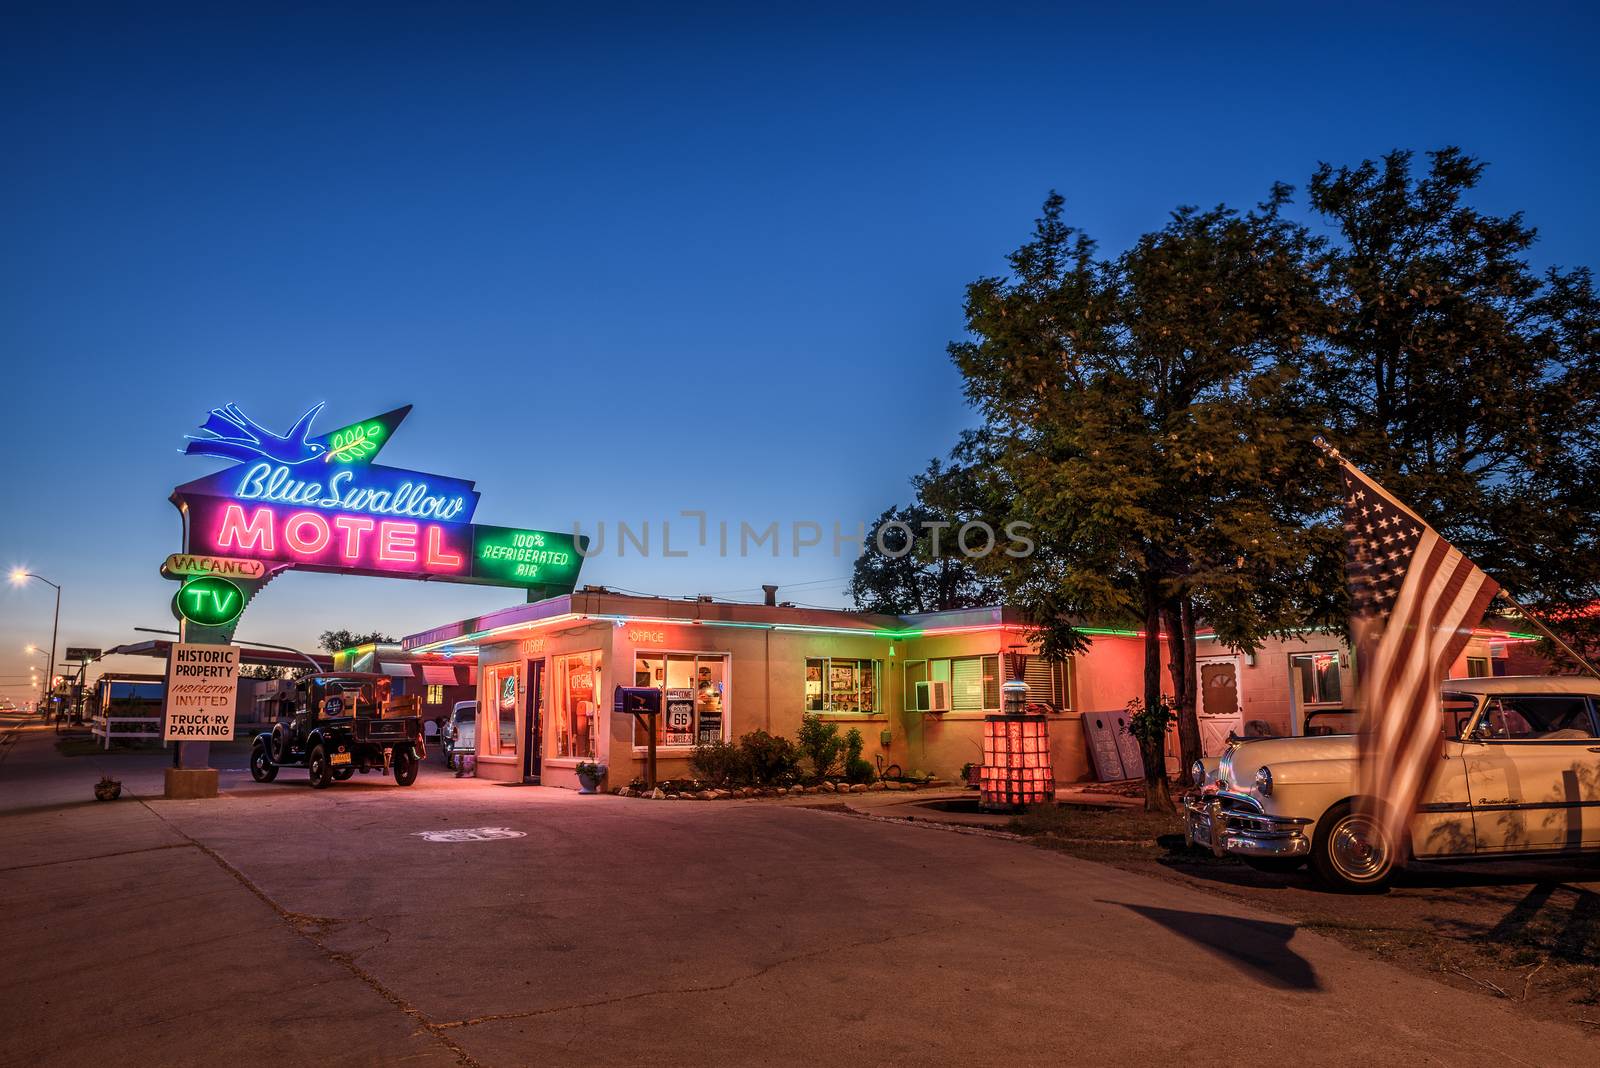 TUCUMCARI, NEW MEXICO - MAY 13, 2016 : Historic Blue Swallow Motel with vintage cars parked in front of it. This building is listed on the National Register of Historic Places in New Mexico.